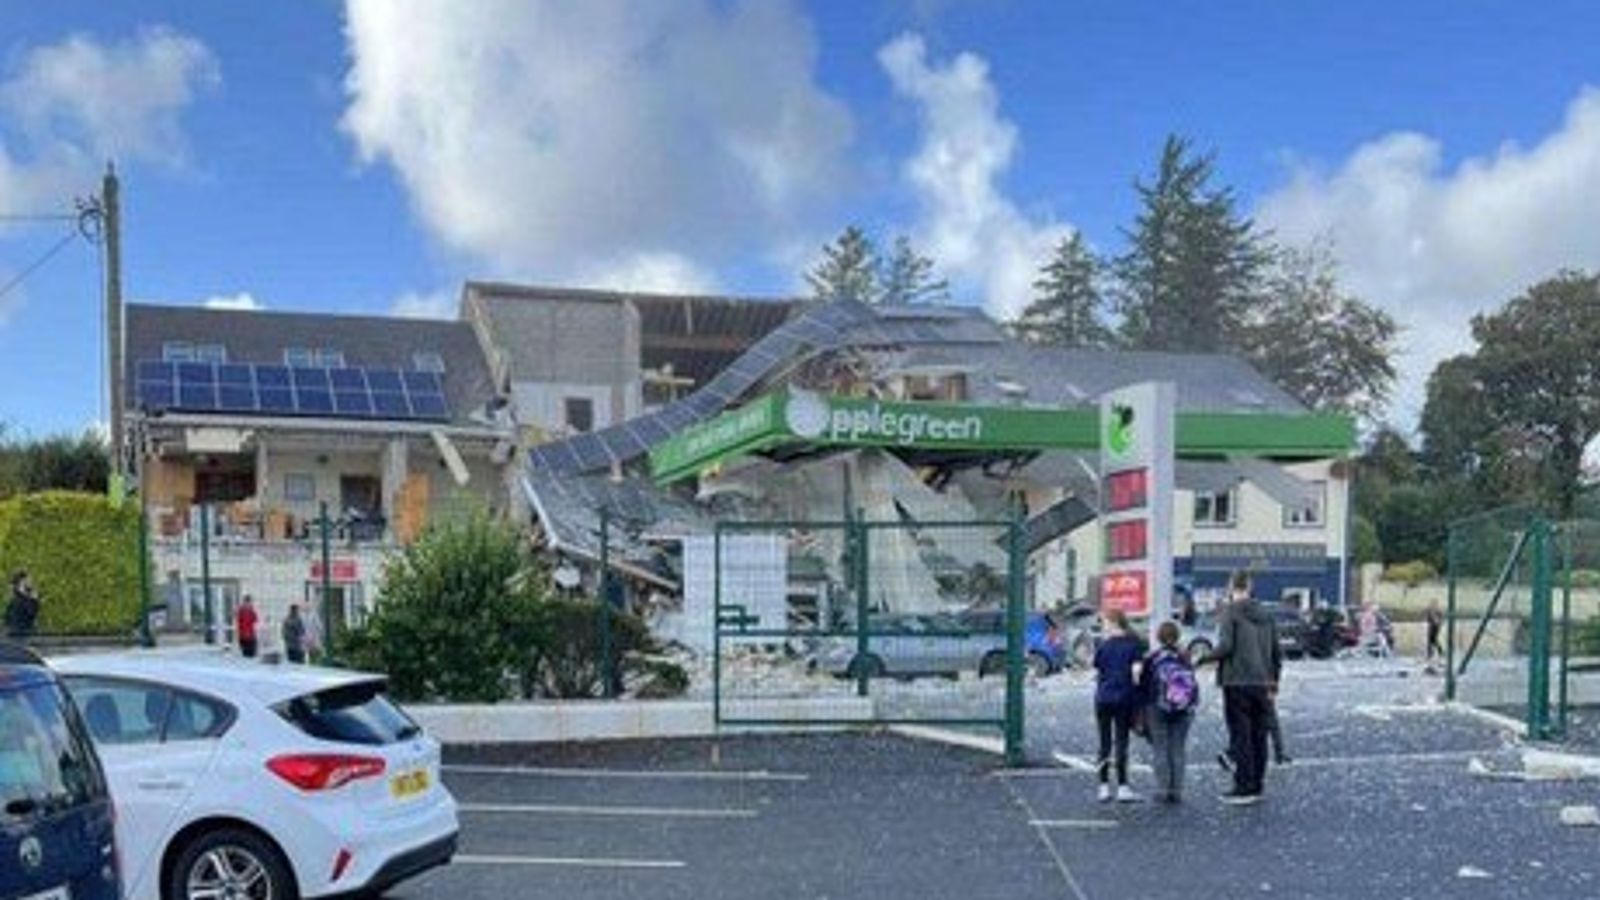 Three people killed in explosion at service station in Ireland